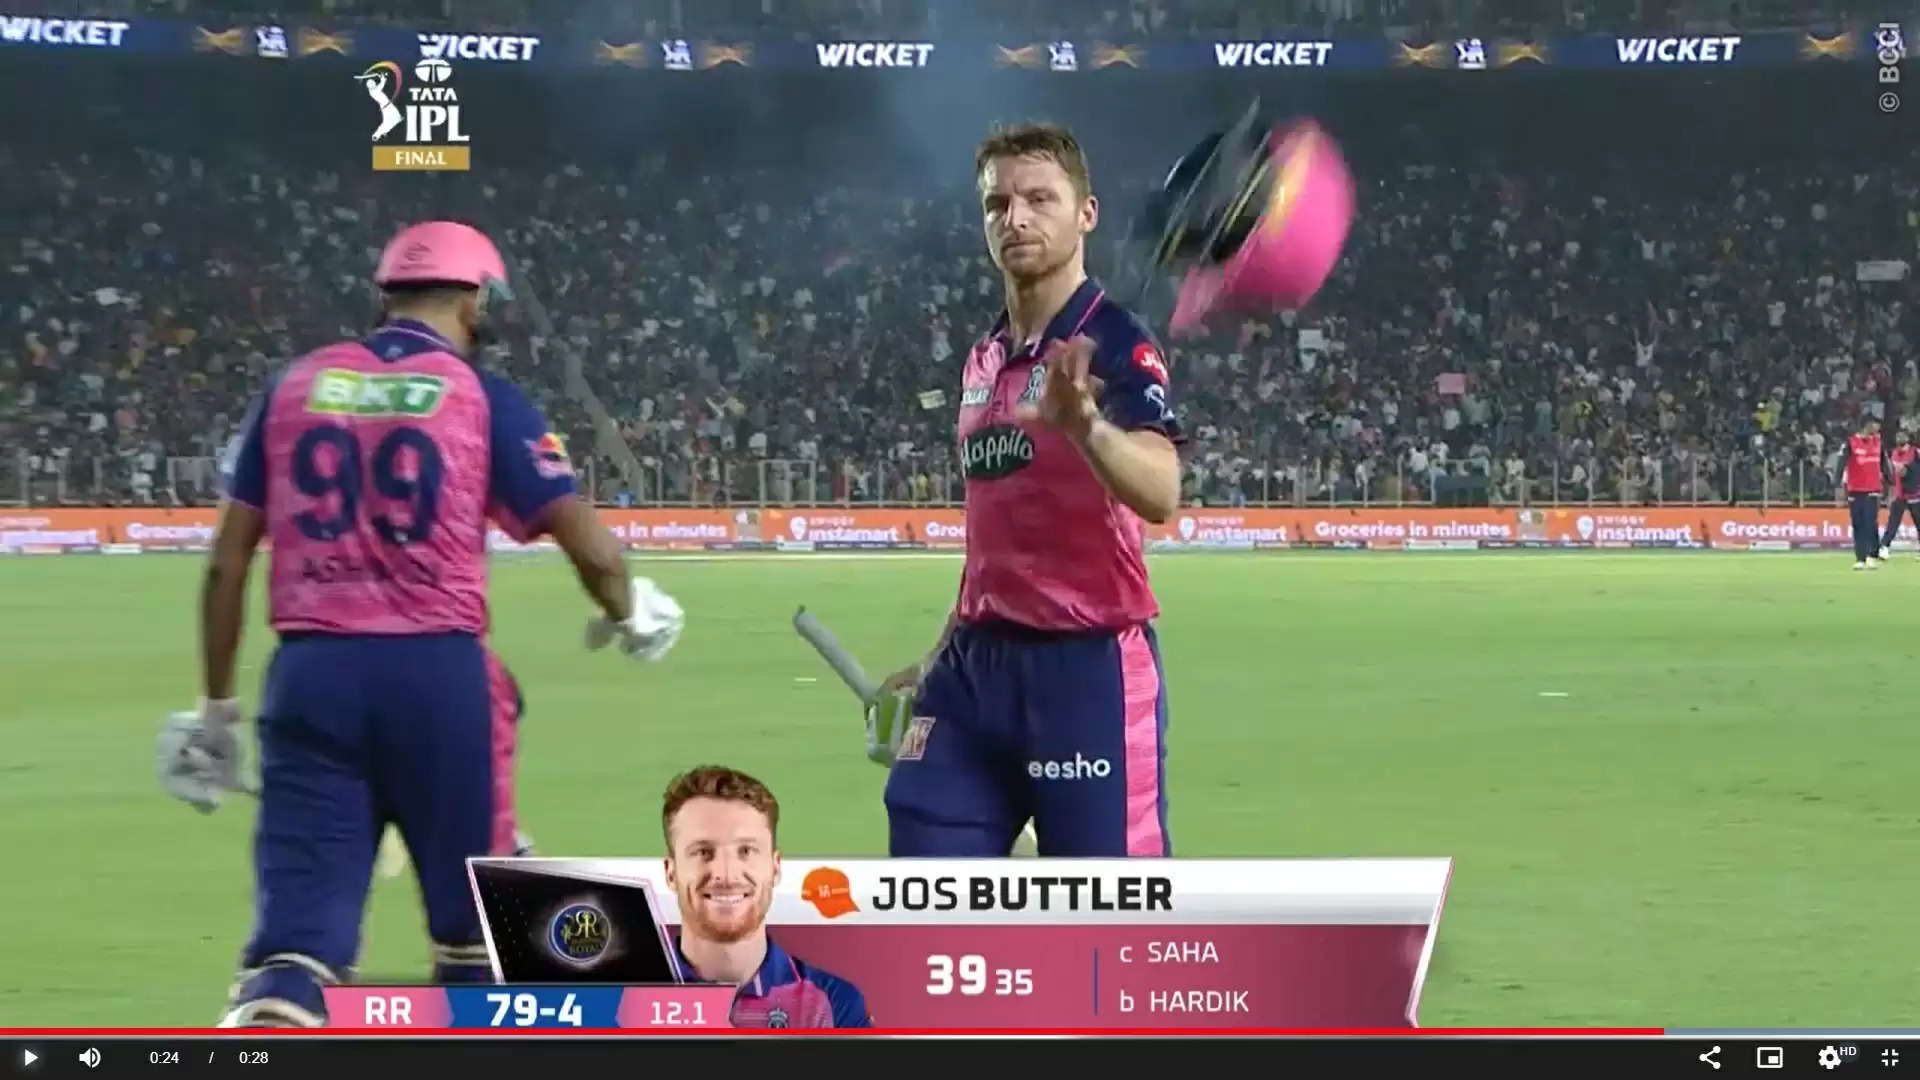 Watch: Jos Buttler throws away helmet and gloves in anger after dismissal  in IPL 2022 final